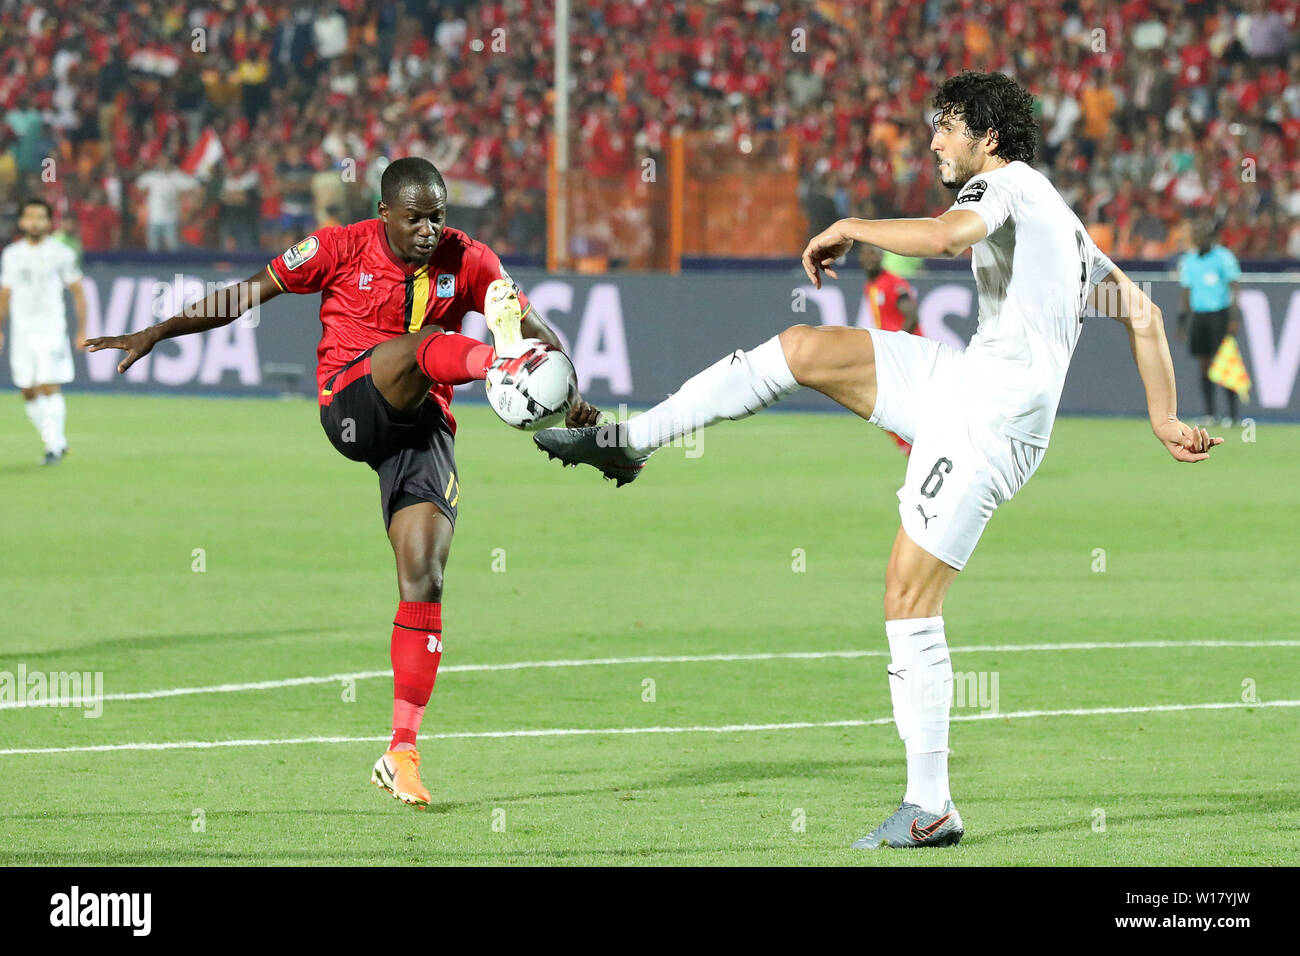 Cairo, Egypt. 30th June, 2019. Farouk Miya (front L) of Uganda vies with Ahmed Elsayed Ali Elsayed Hegazy of Egypt during the 2019 Africa Cup of Nations group A match in Cairo, Egypt, June 30, 2019. Credit: Wang Teng/Xinhua/Alamy Live News Stock Photo